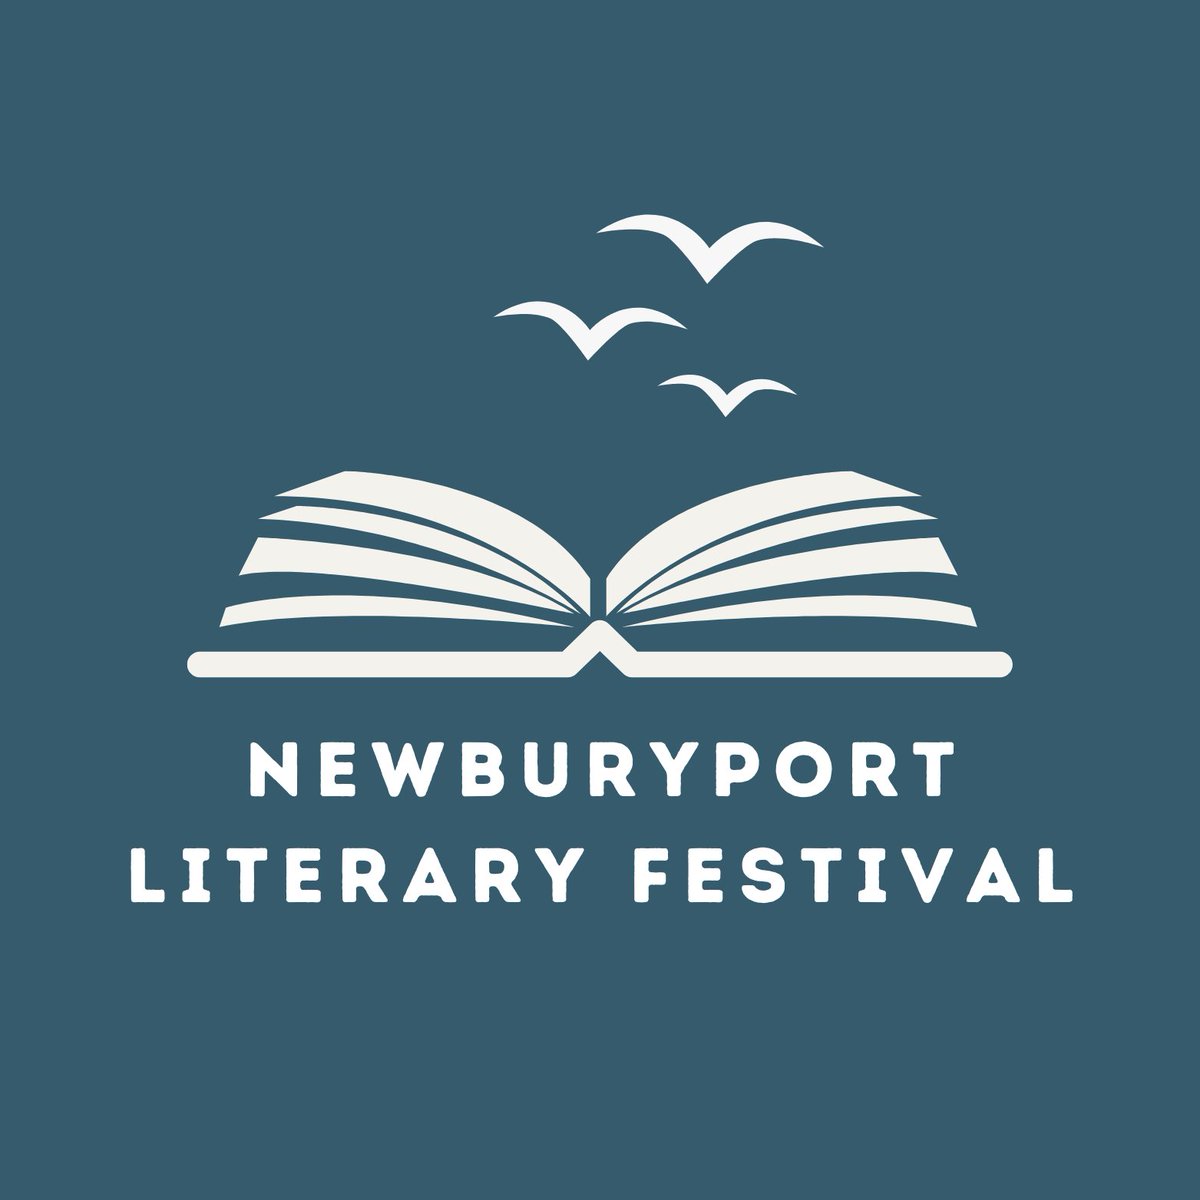 Hope to see you this weekend in beautiful #newburyportma! @NBPTLitFest promises to be a fabulous #litevent! See: ow.ly/8GTW50RnZmo #authors #fiction #nonfiction #poetry #bookstagram #CenterForTheBook @MassLibAssoc @mblclibraries @NEIBAbooks @masspoetry @JabberwockyBks